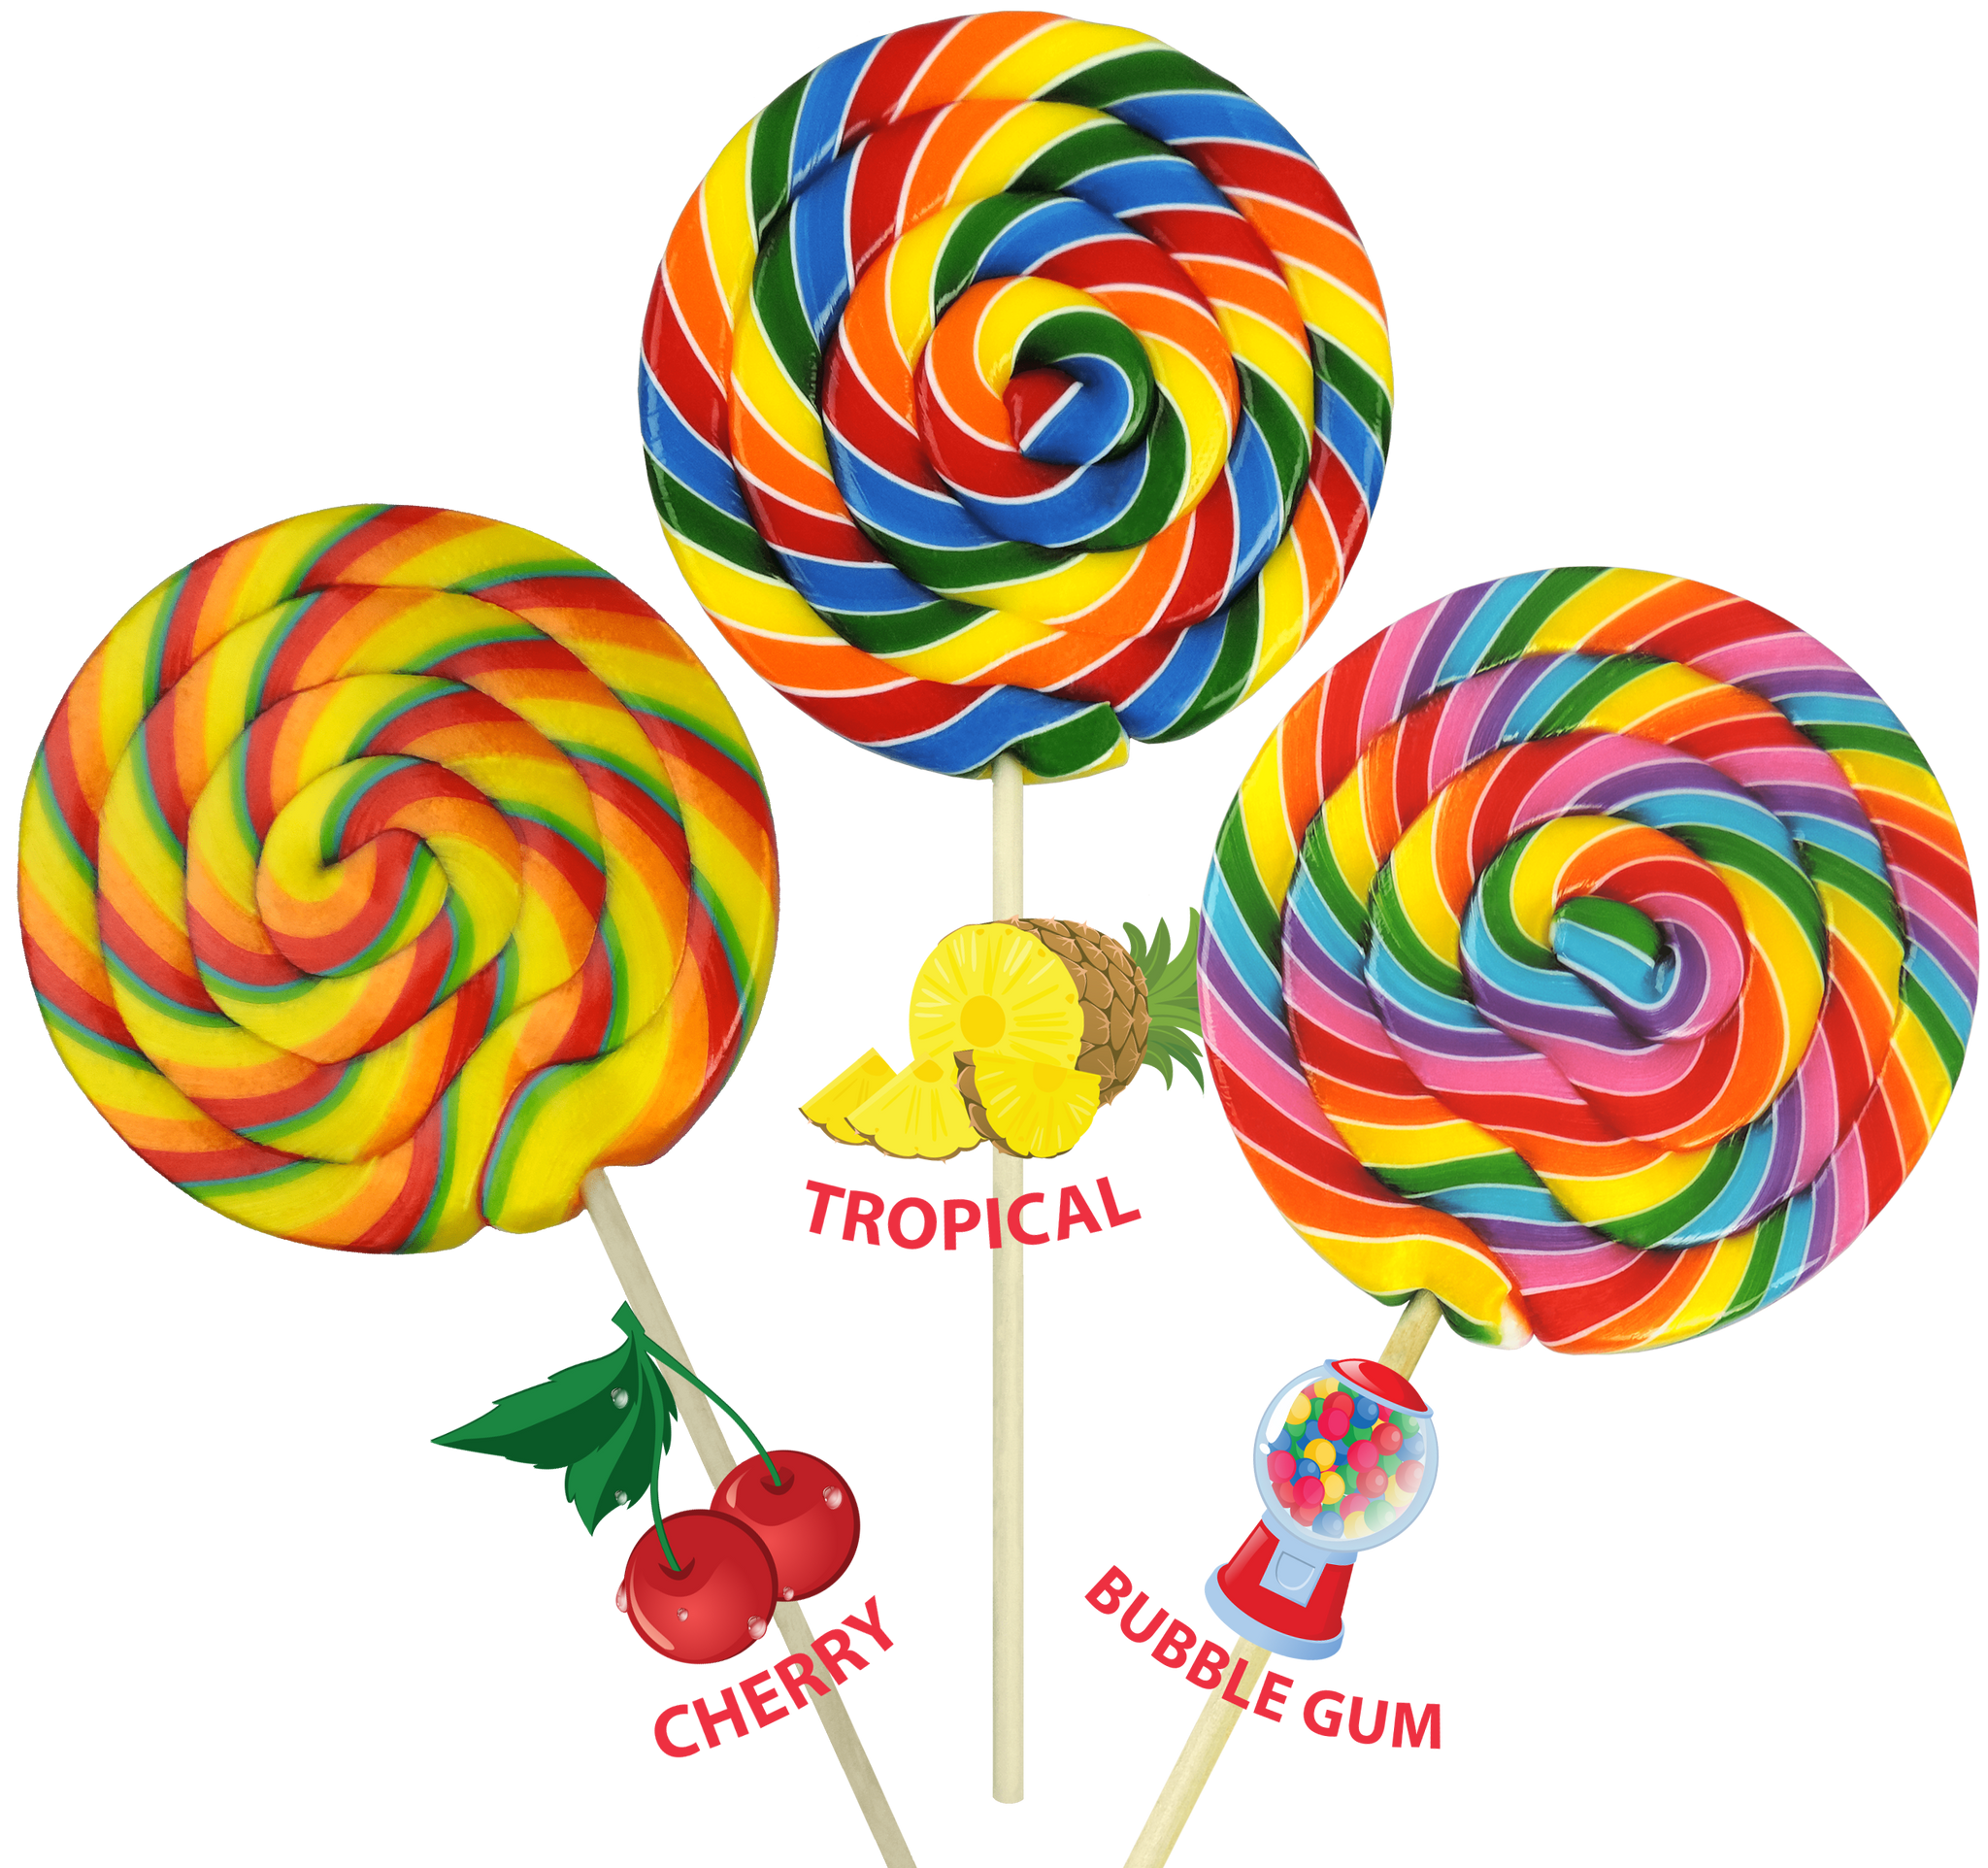 Original Gourmet Hard Candy & Lollipops in Candy 